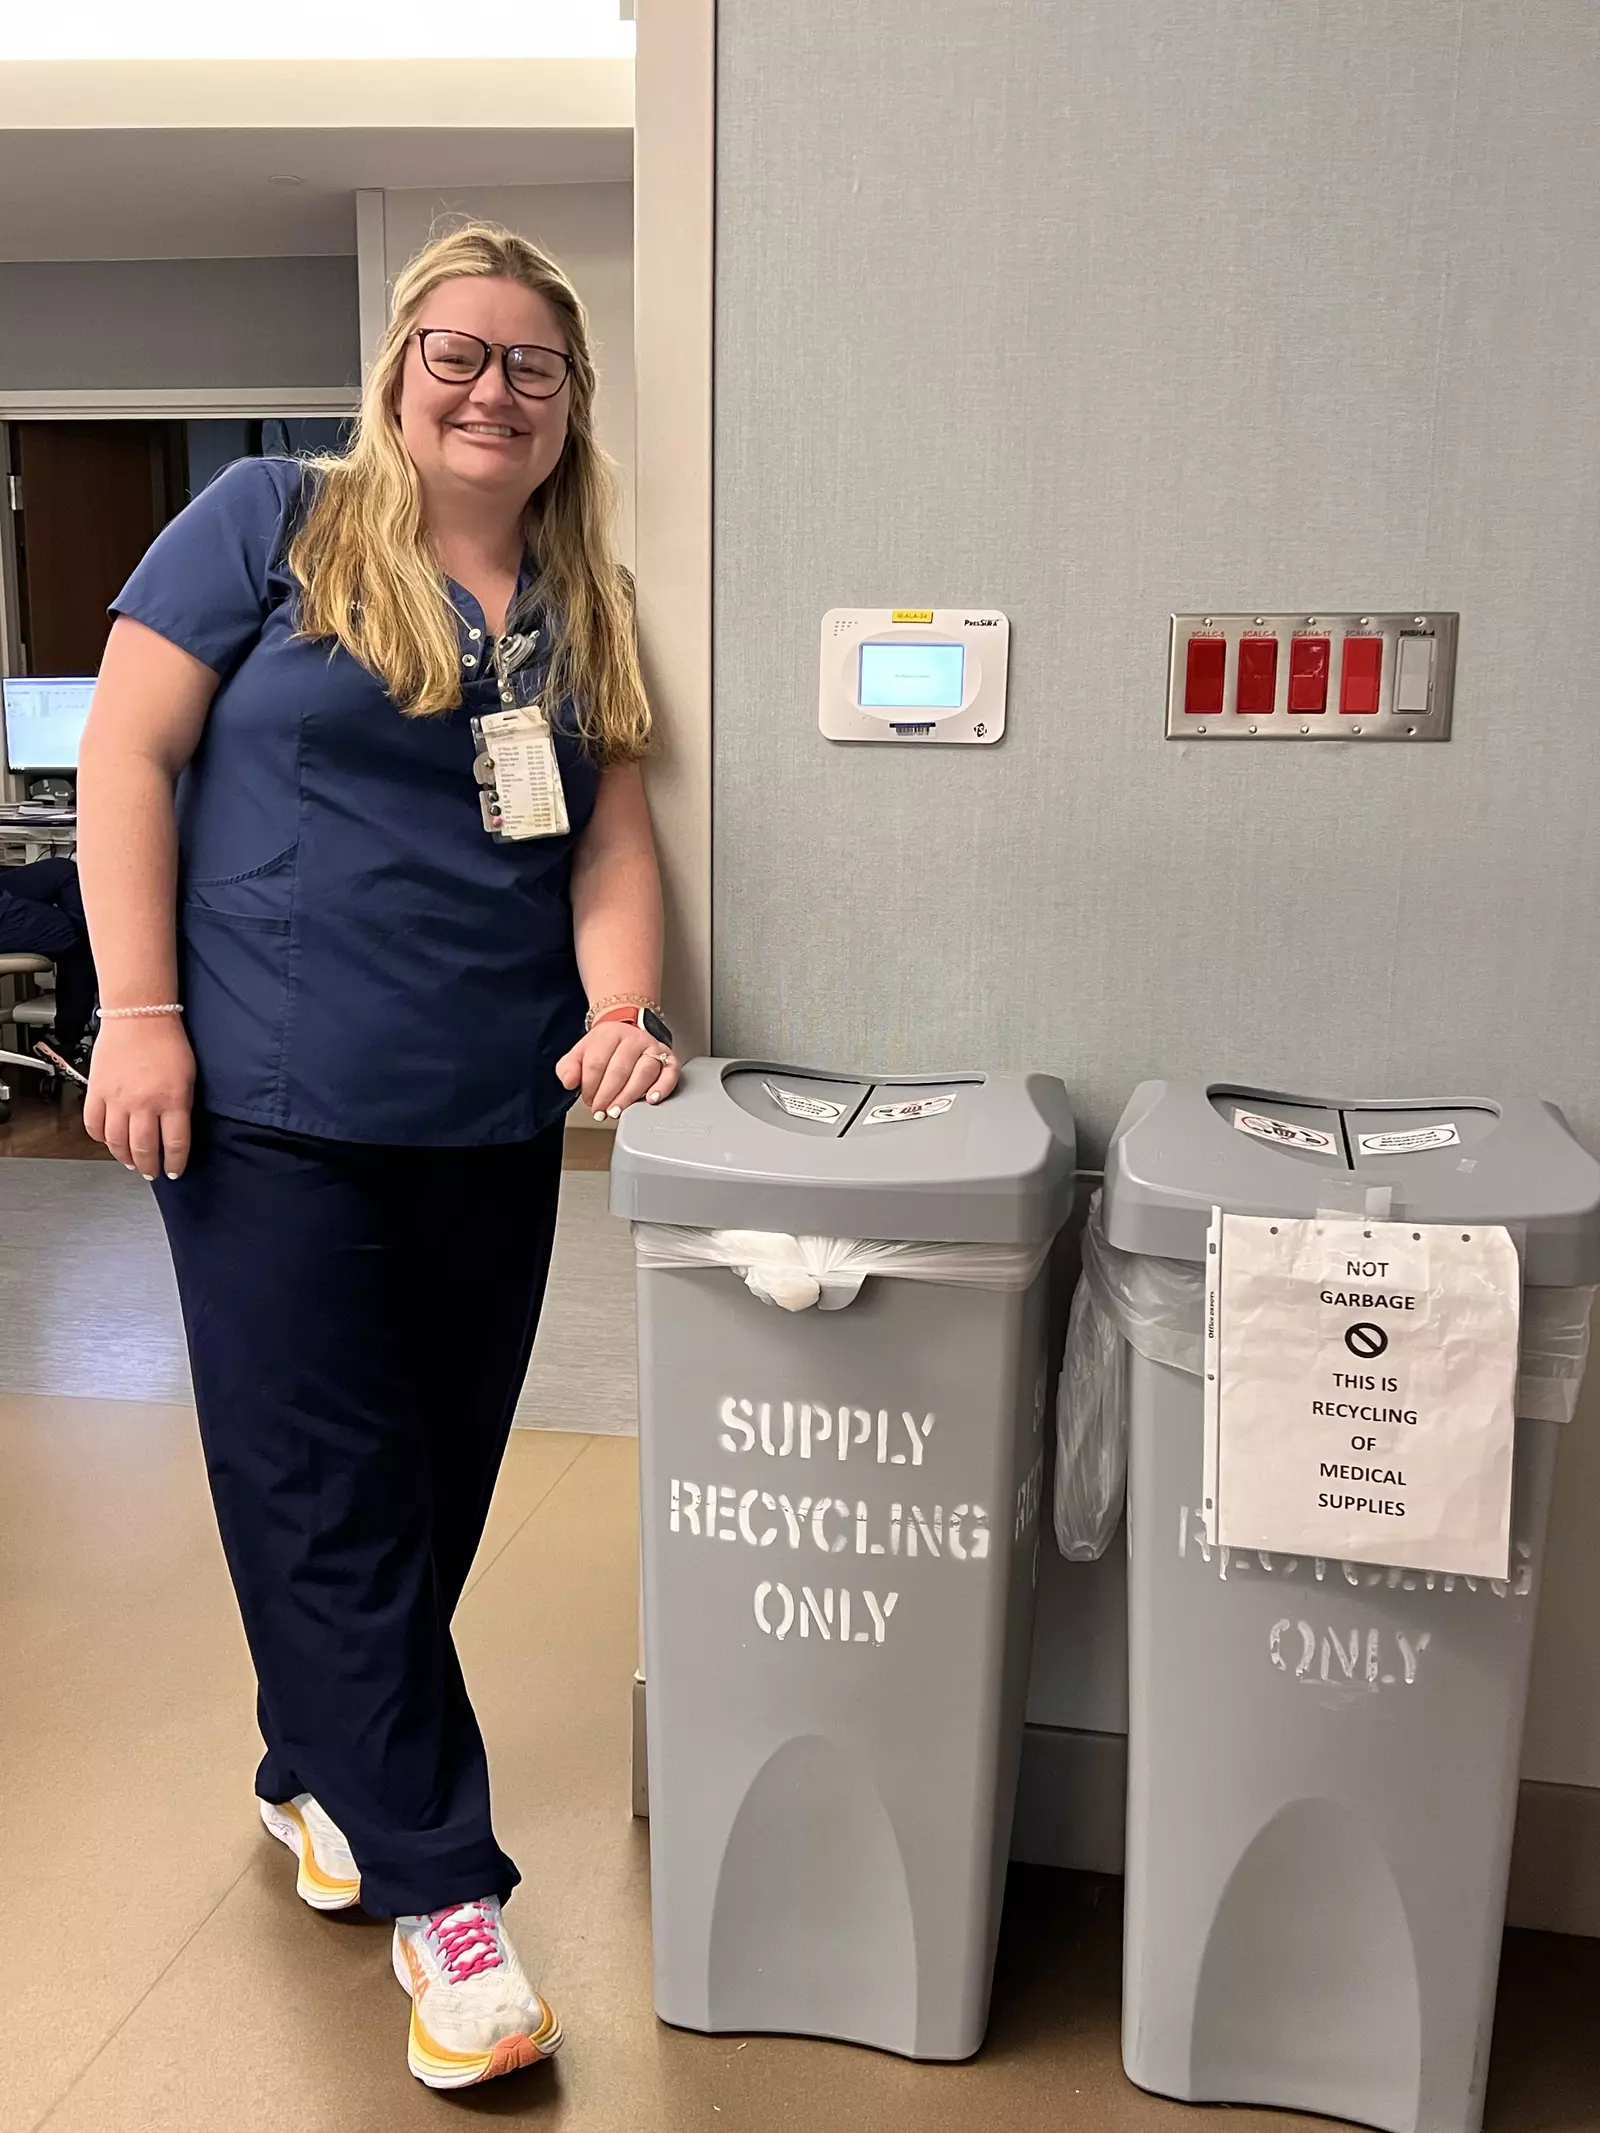 Graycen Holmes in front of supply recycling bins